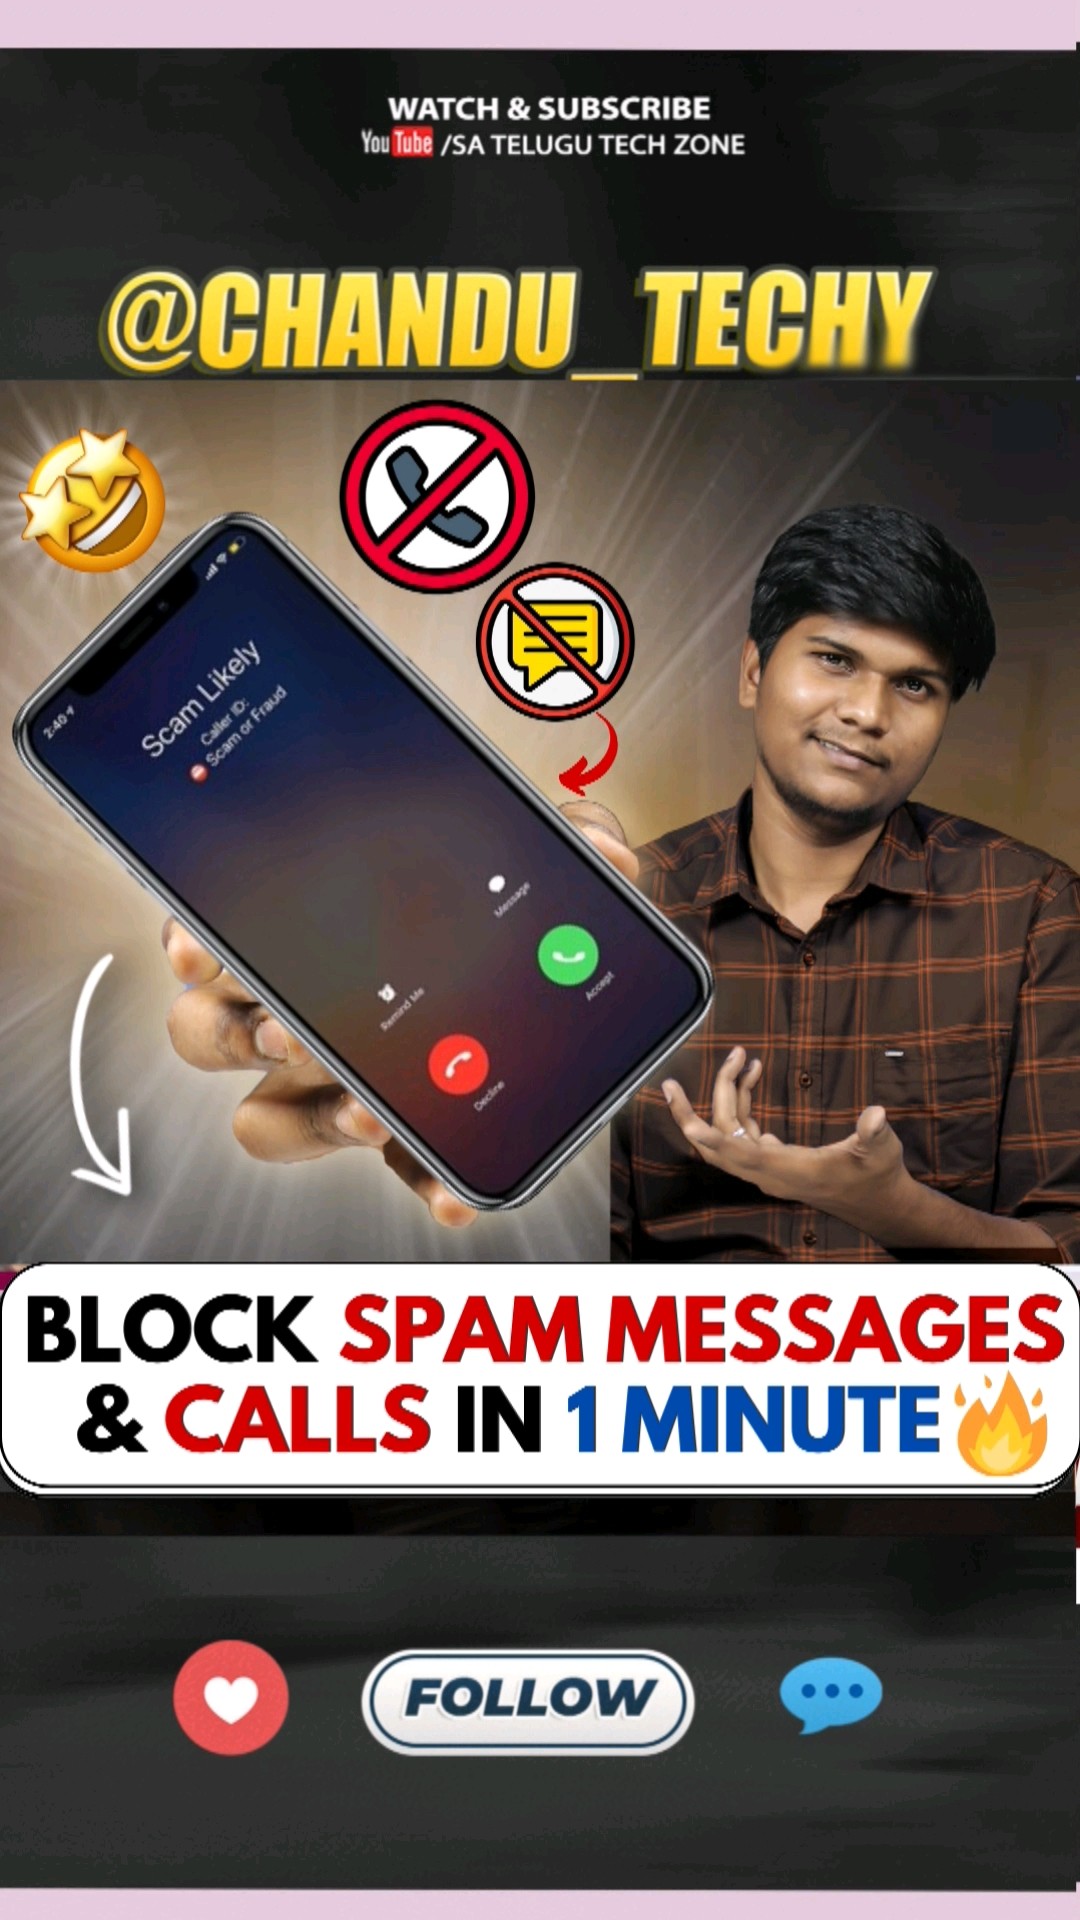 Block unwanted messages and calls in 1 minute #ytshorts #shorts #satelugutechzone #spam